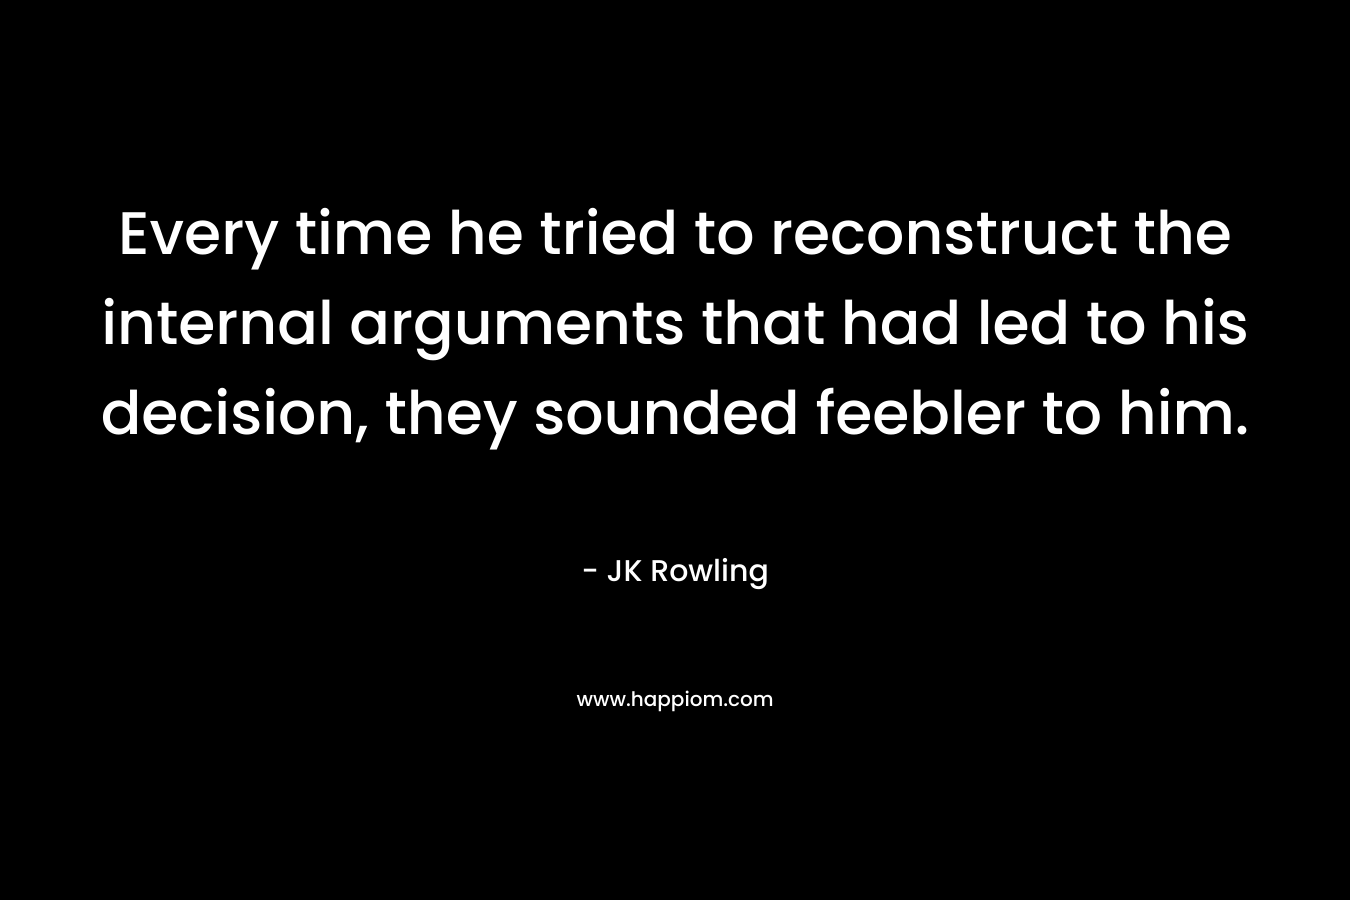 Every time he tried to reconstruct the internal arguments that had led to his decision, they sounded feebler to him. – JK Rowling